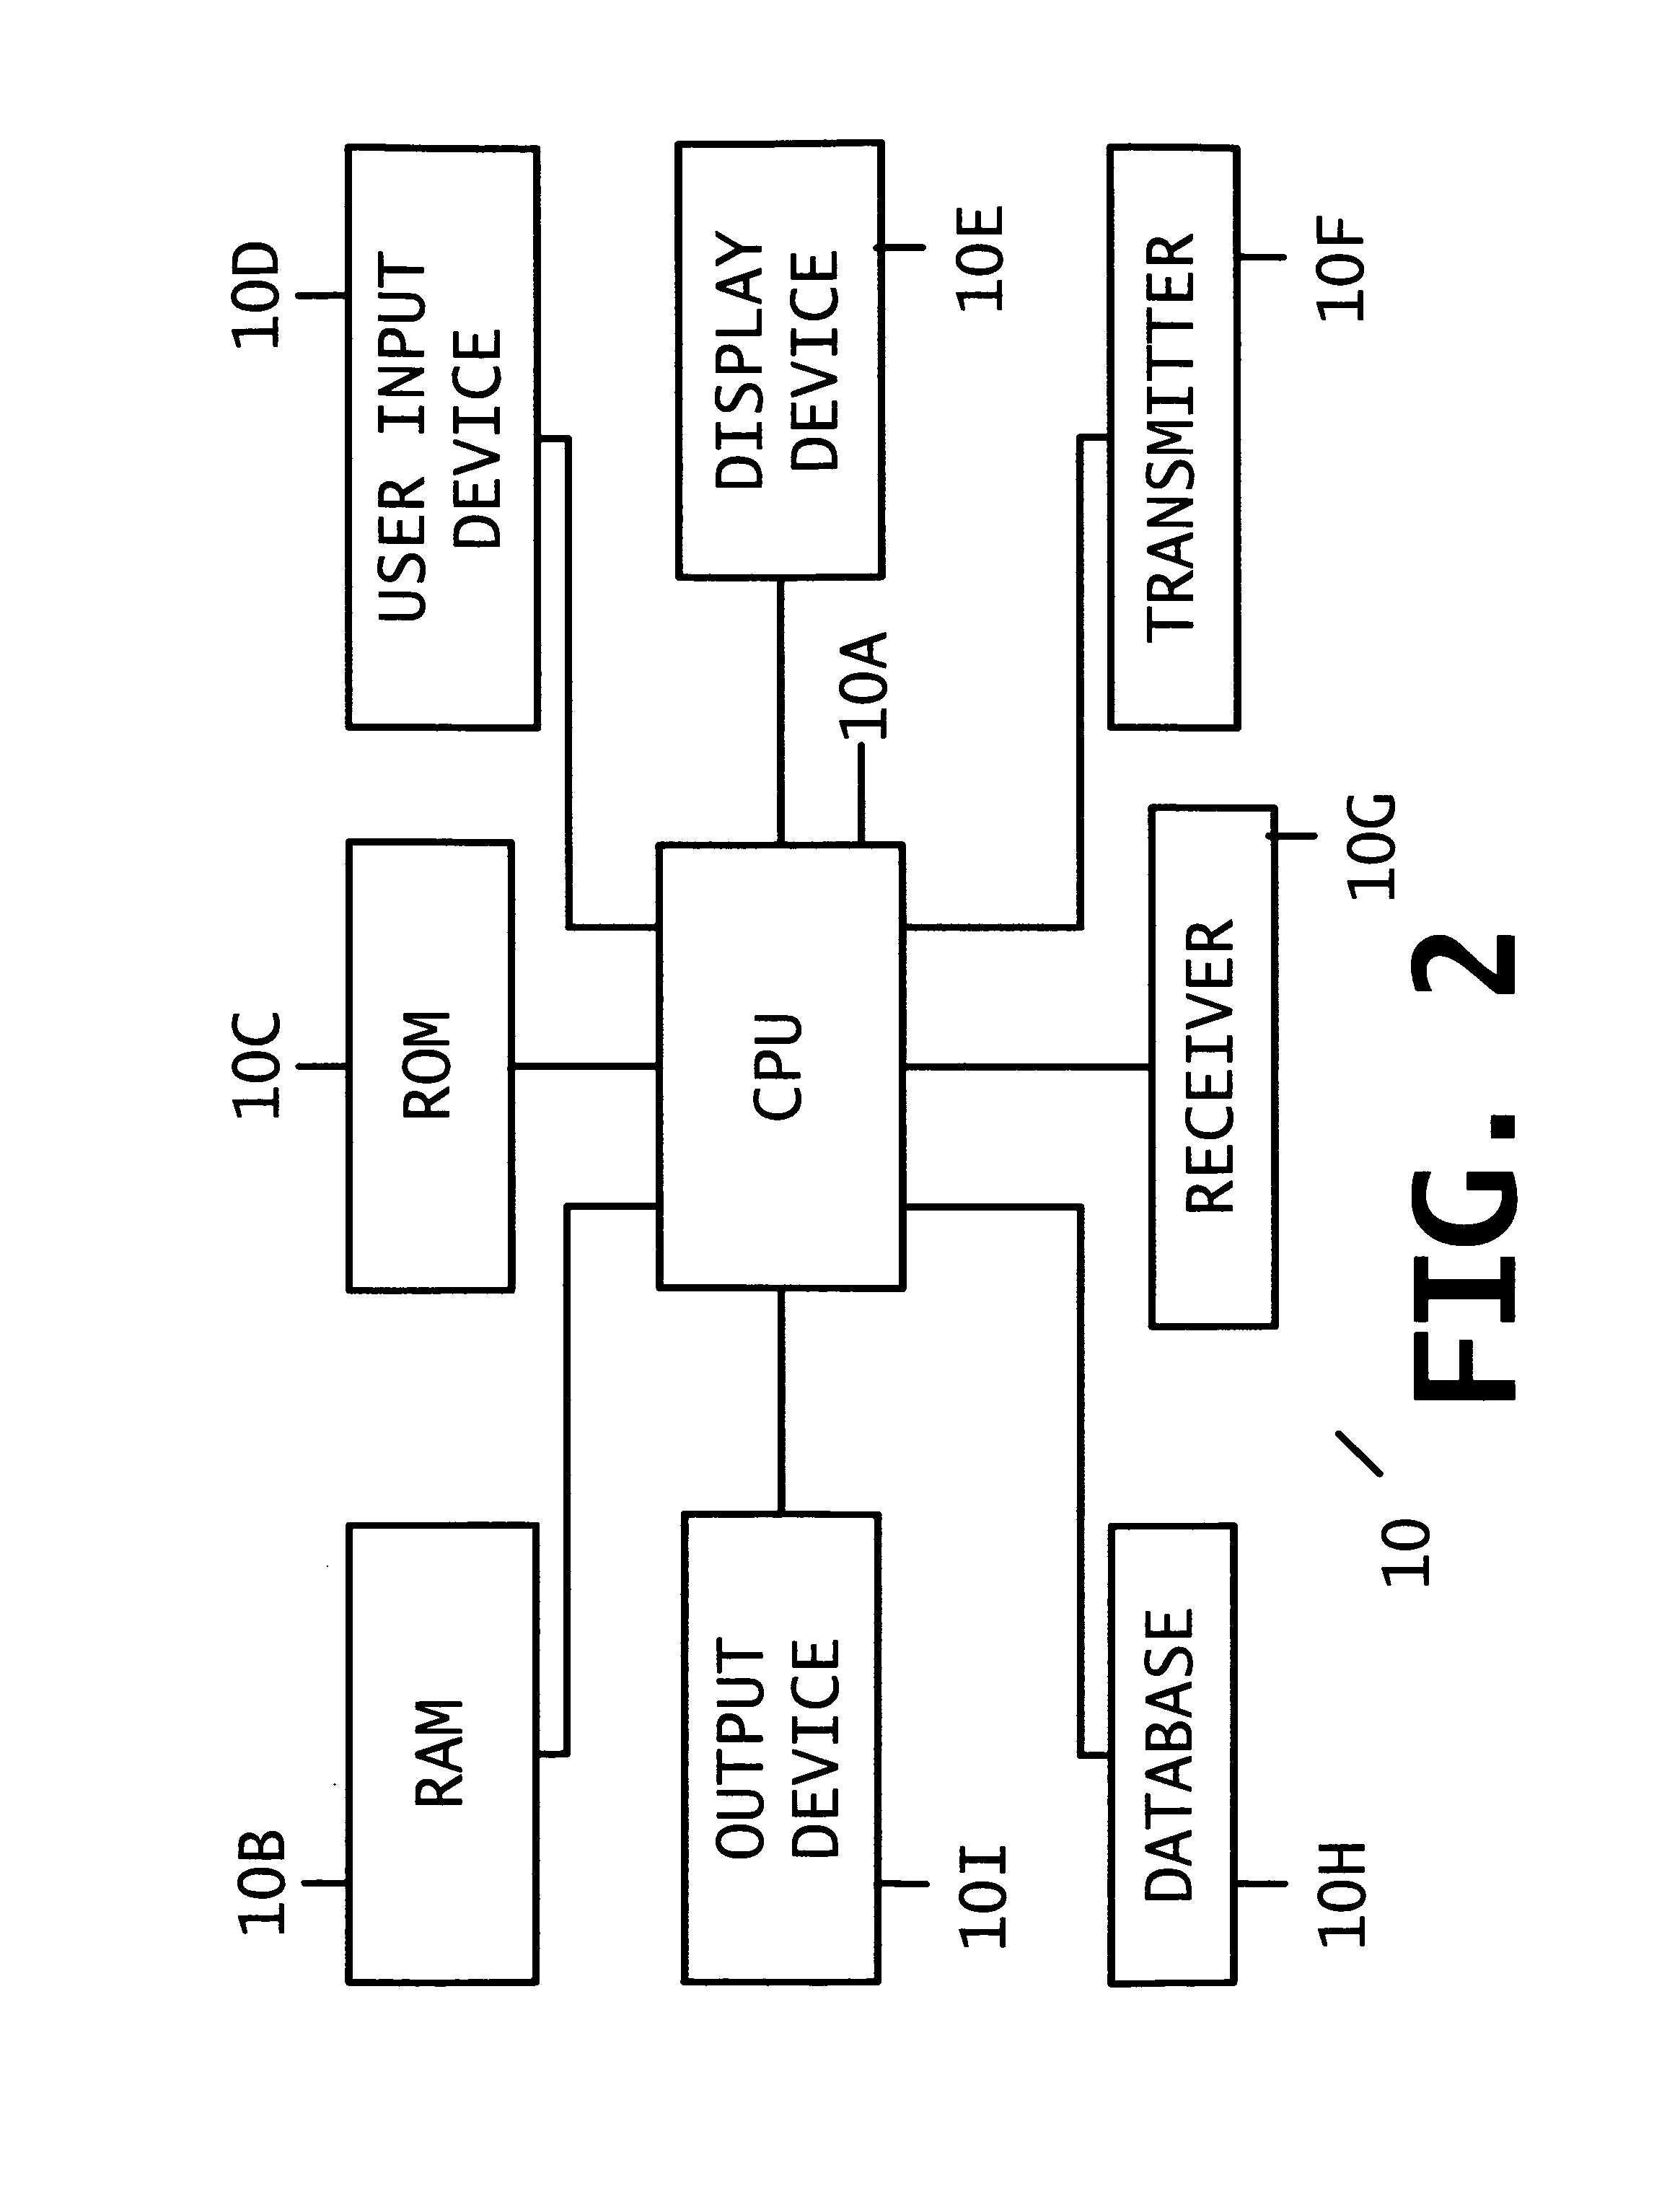 Apparatus and method for processing and/or for providing education information and/or education related information